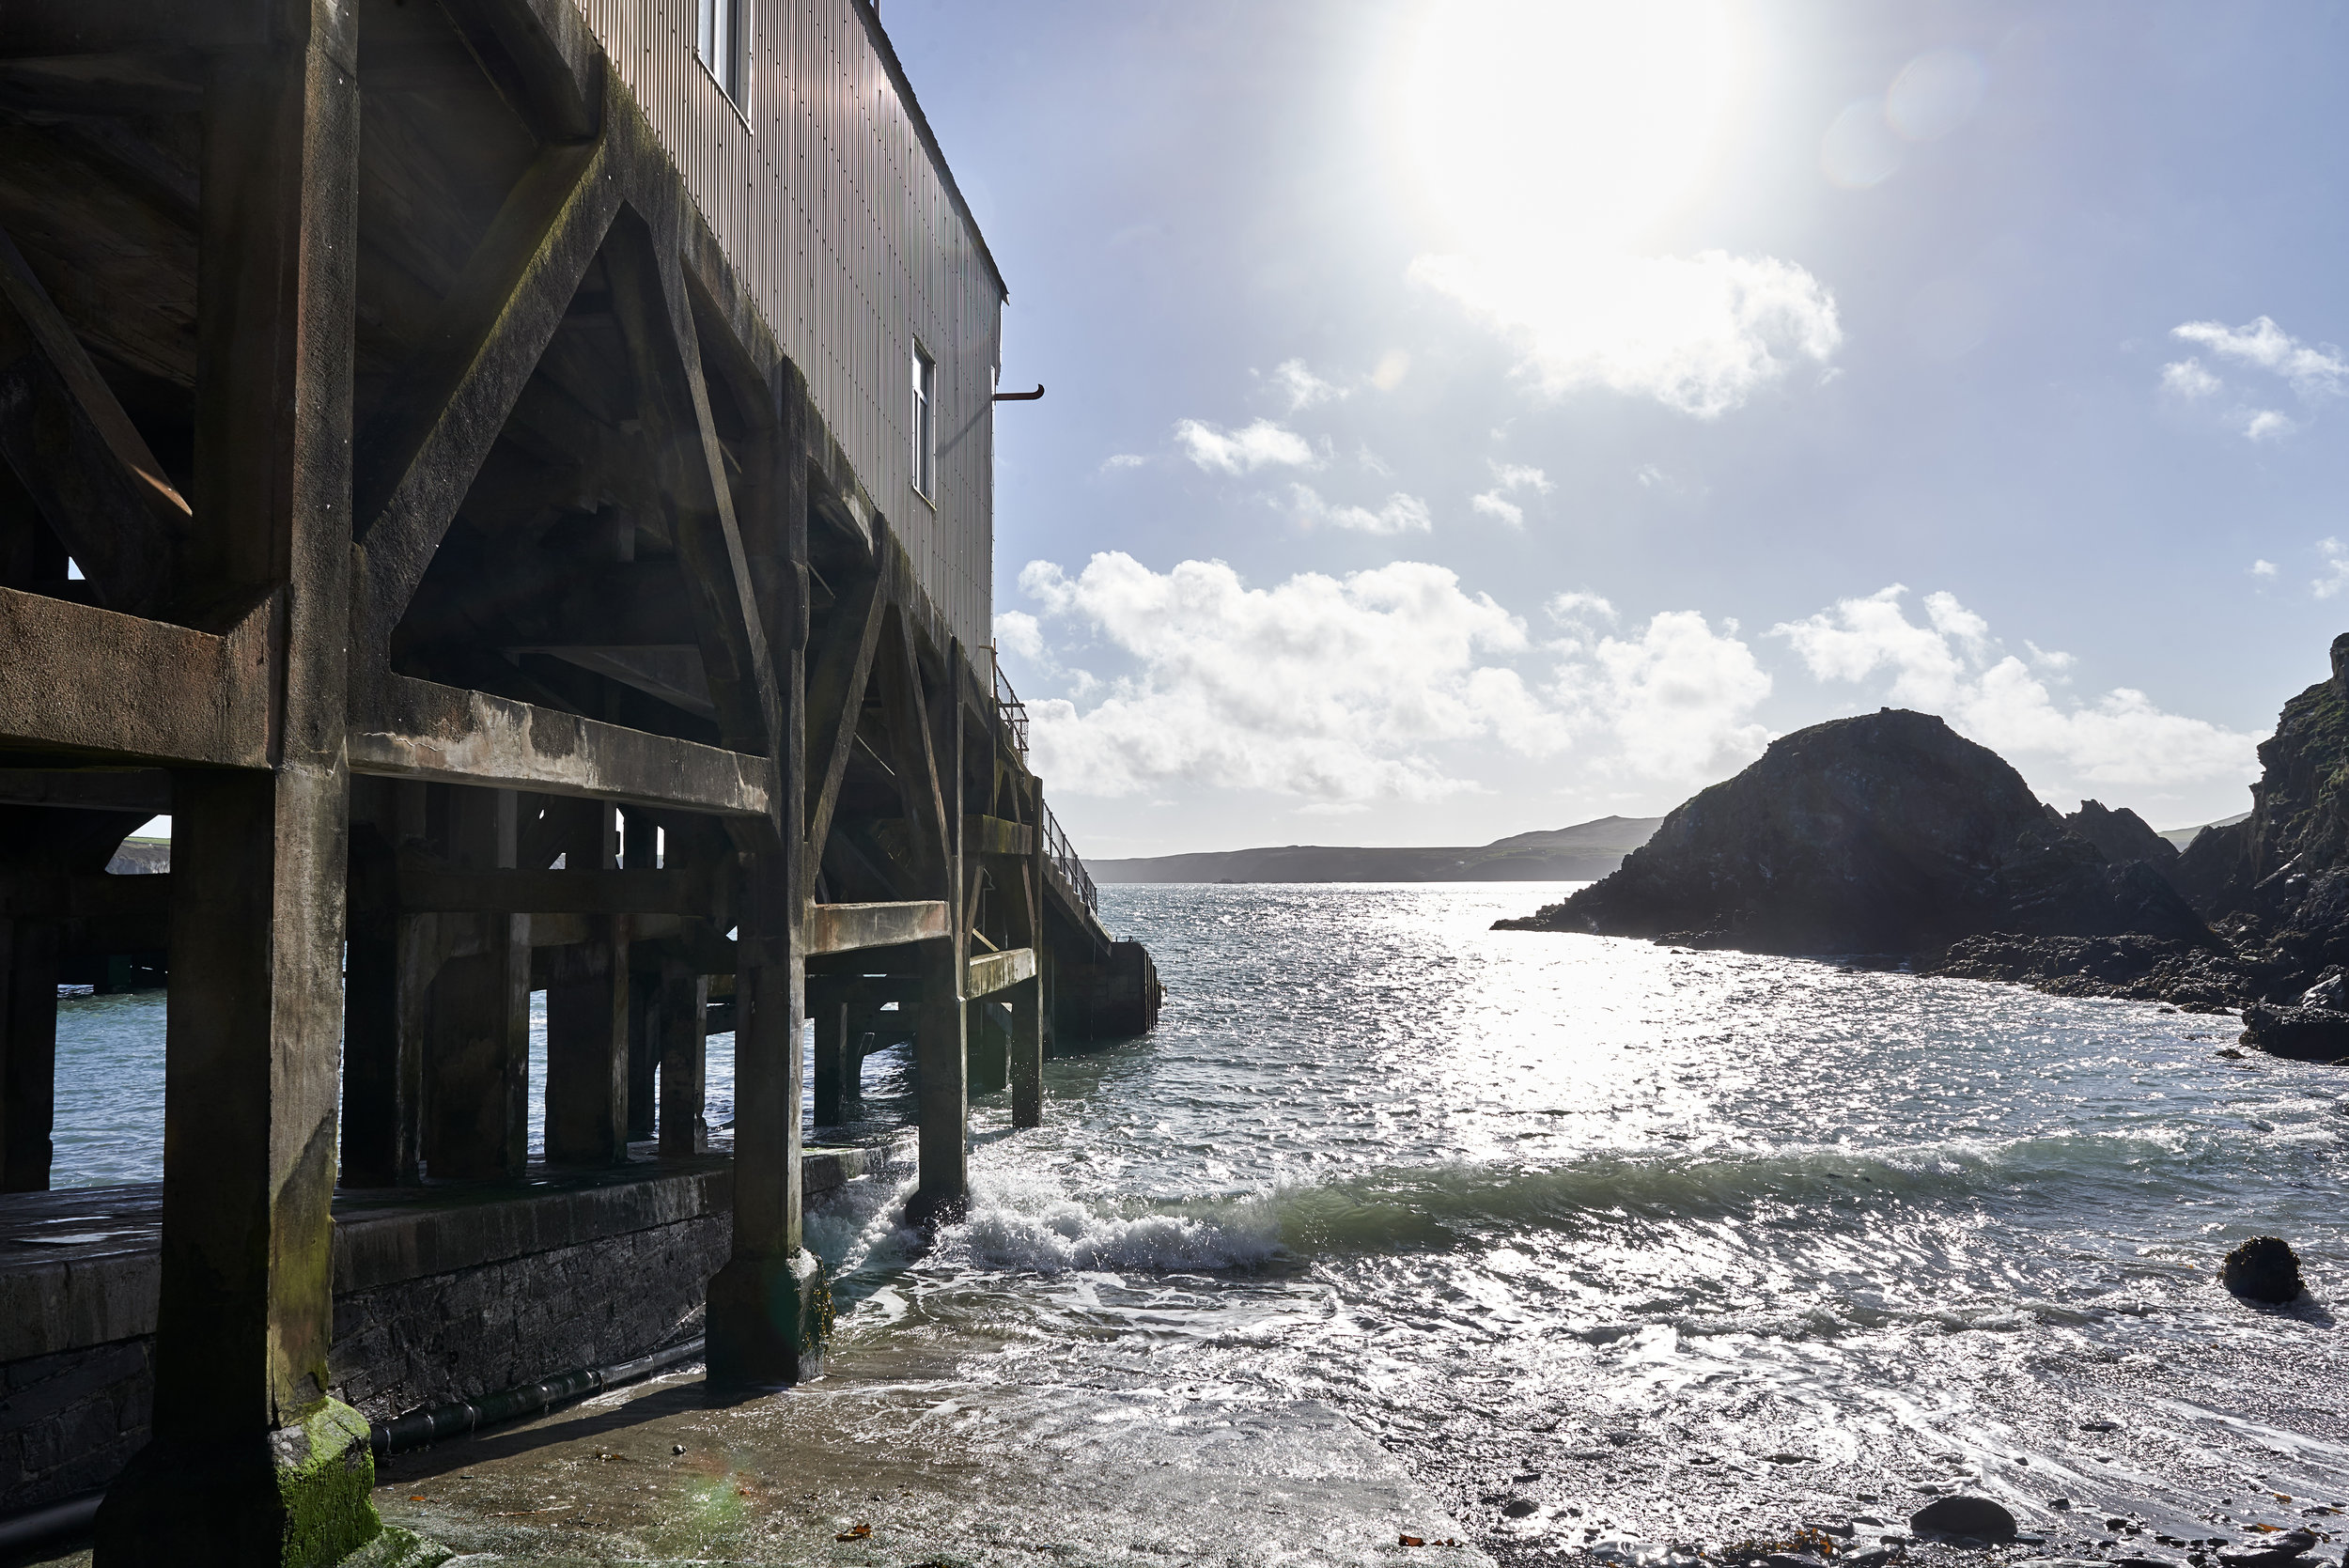 Lifeboat Station. St Justinian's, Pembrokeshire